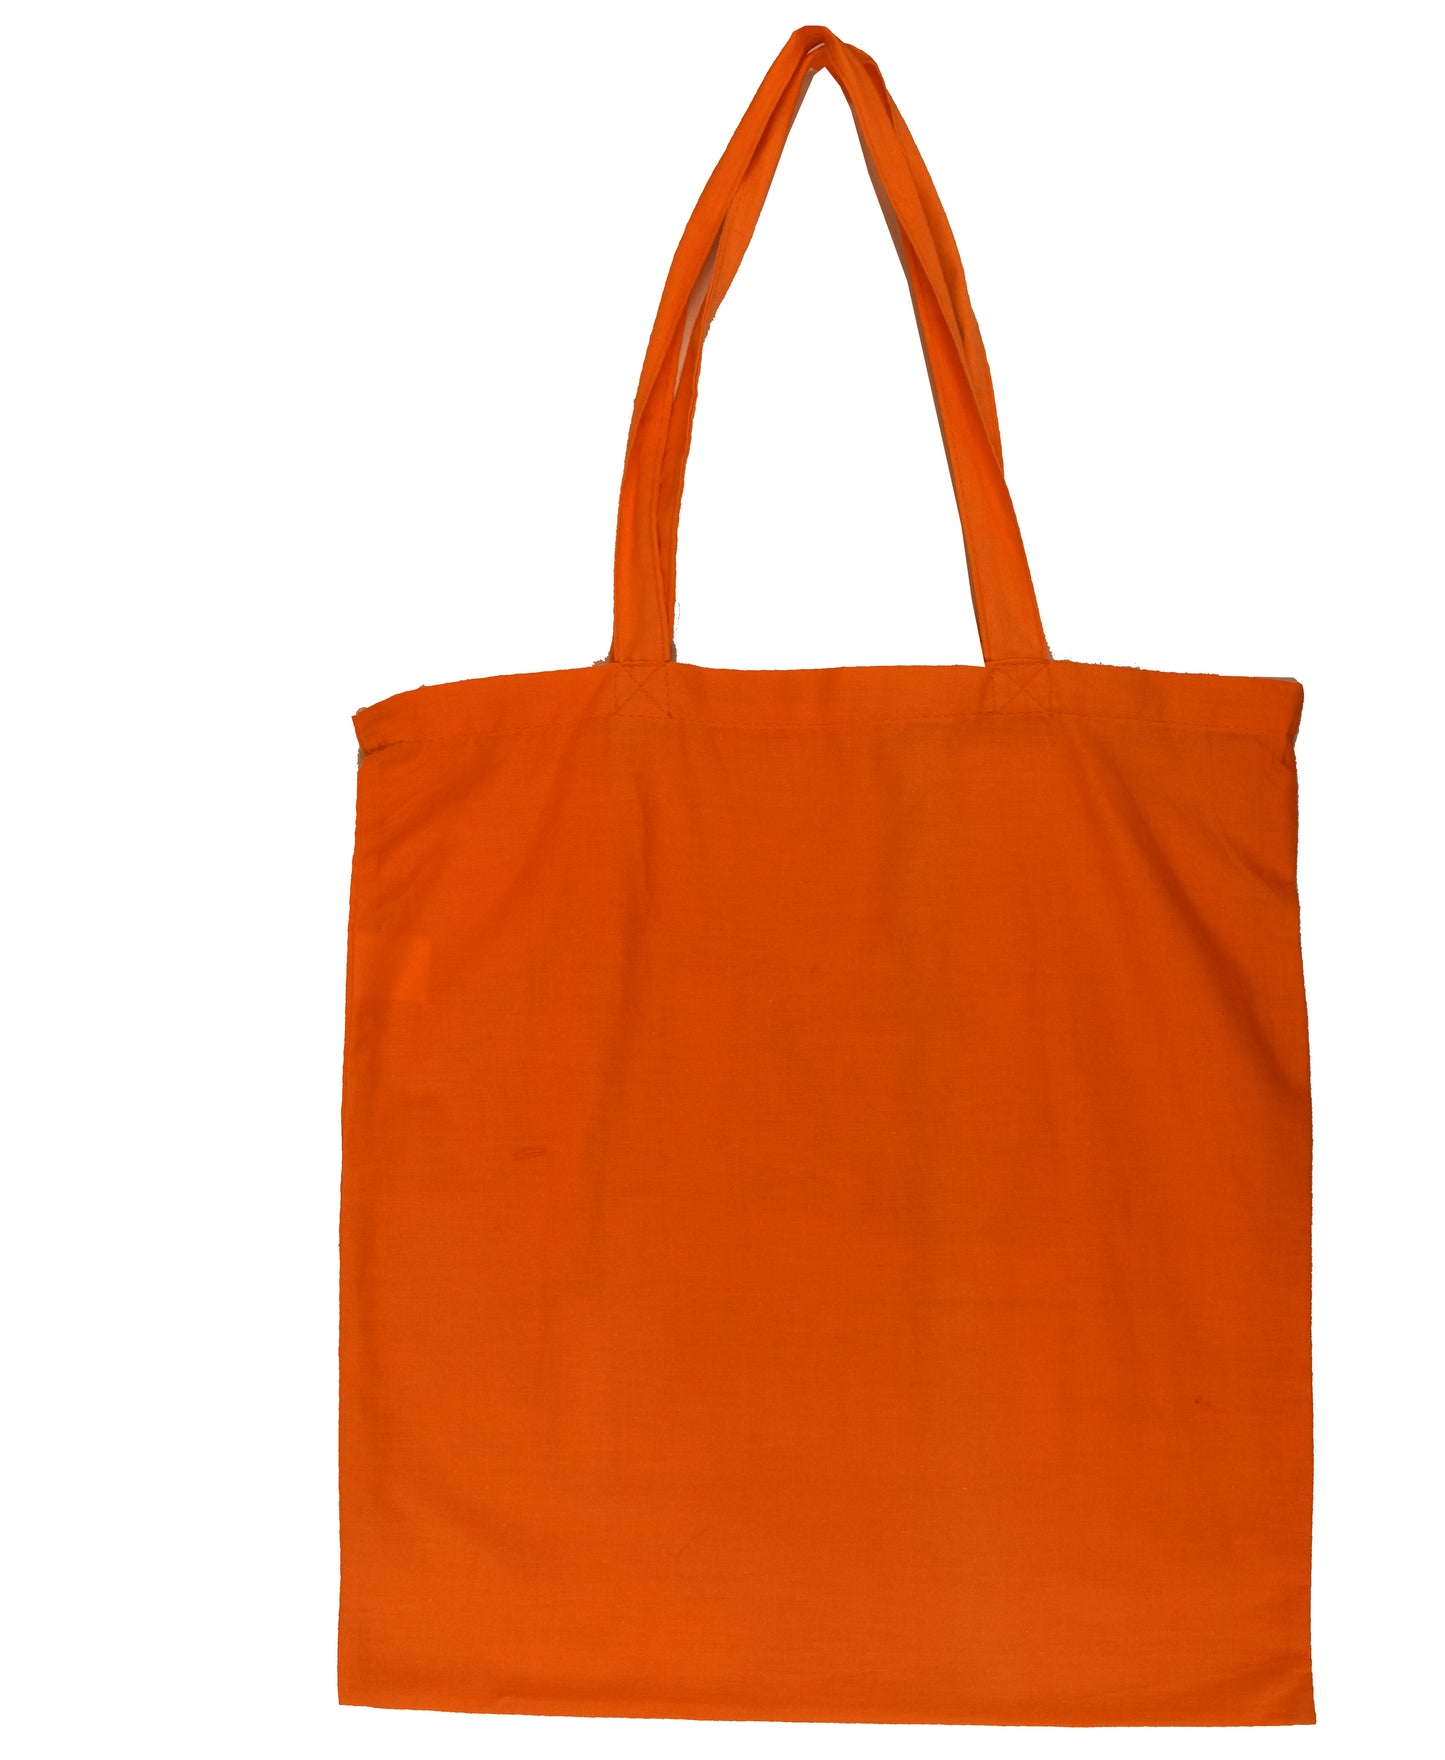 Stylish Tote Bag | Cotton Tote Bag | Justtotebags.online